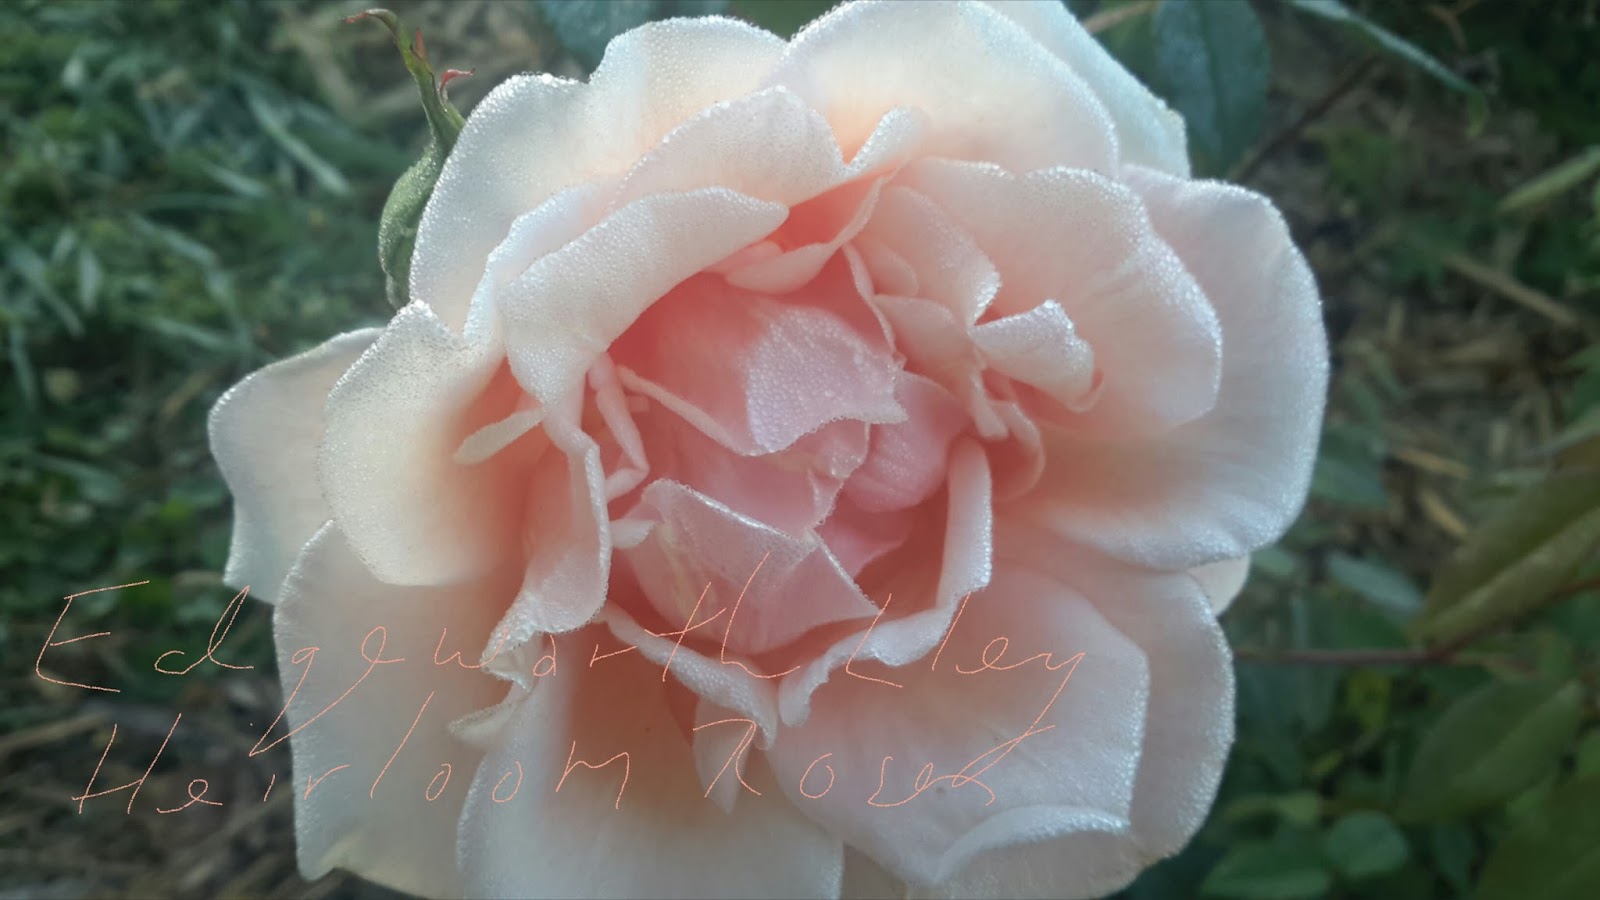 .. AT MY ROSE GARDEN - 'Edgeworth Lley', Heirloom Roses: Give Me Old ...